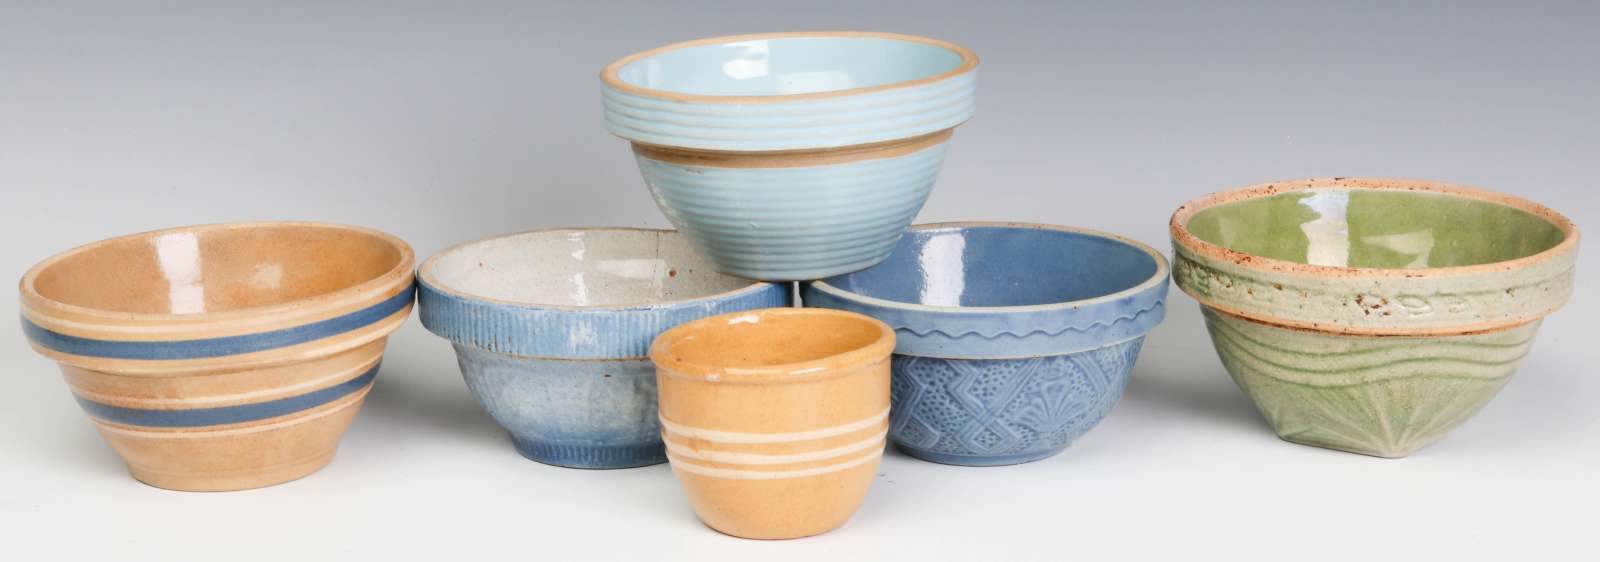 A COLLECTION OF FIVE MINIATURE STONEWARE BOWLS